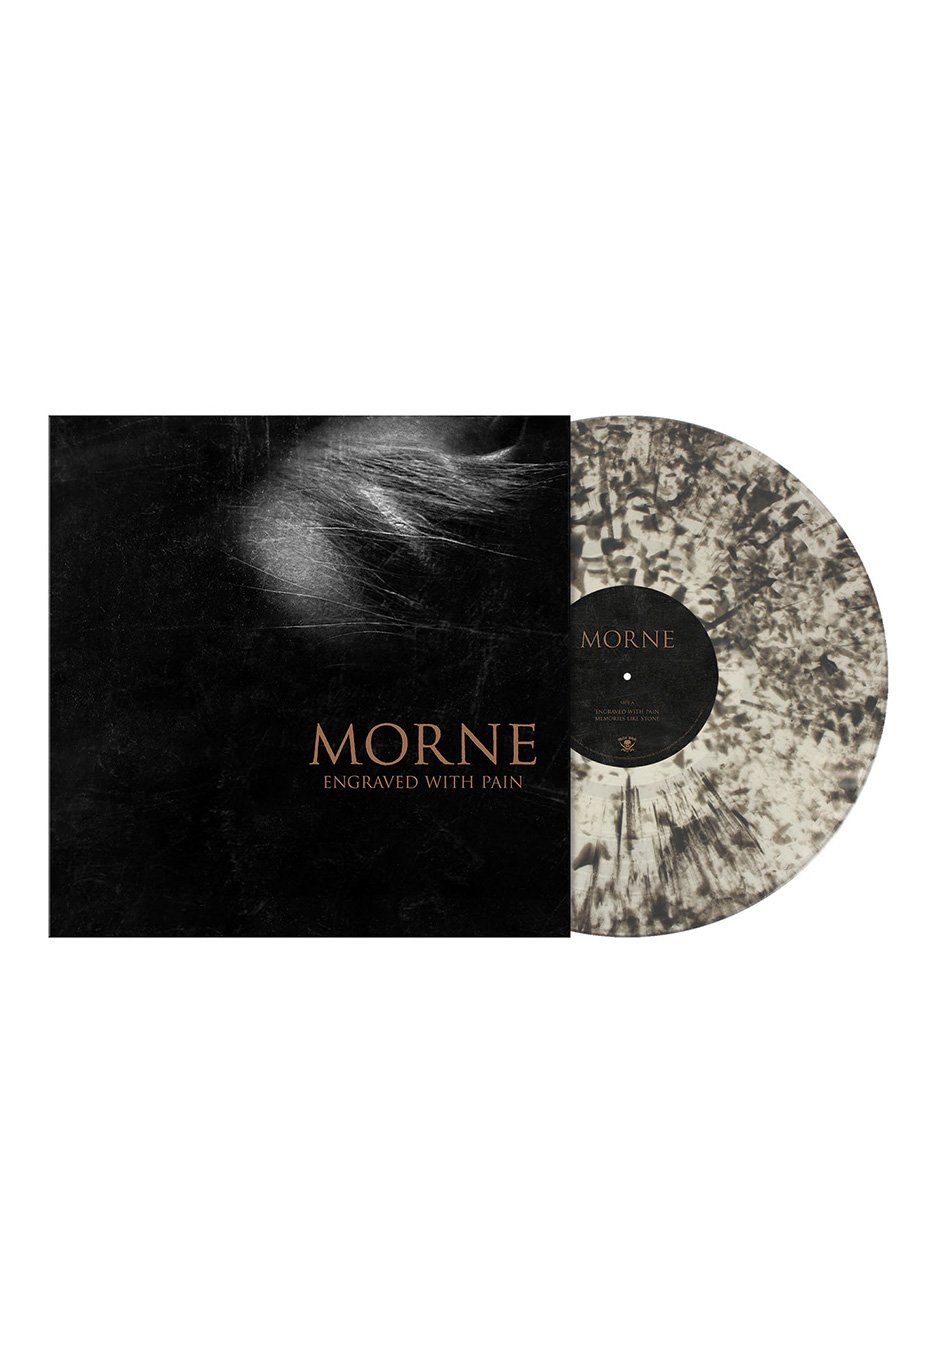 Morne - Engraved With Pain Ltd. Clear/Blackdust - Colored Vinyl